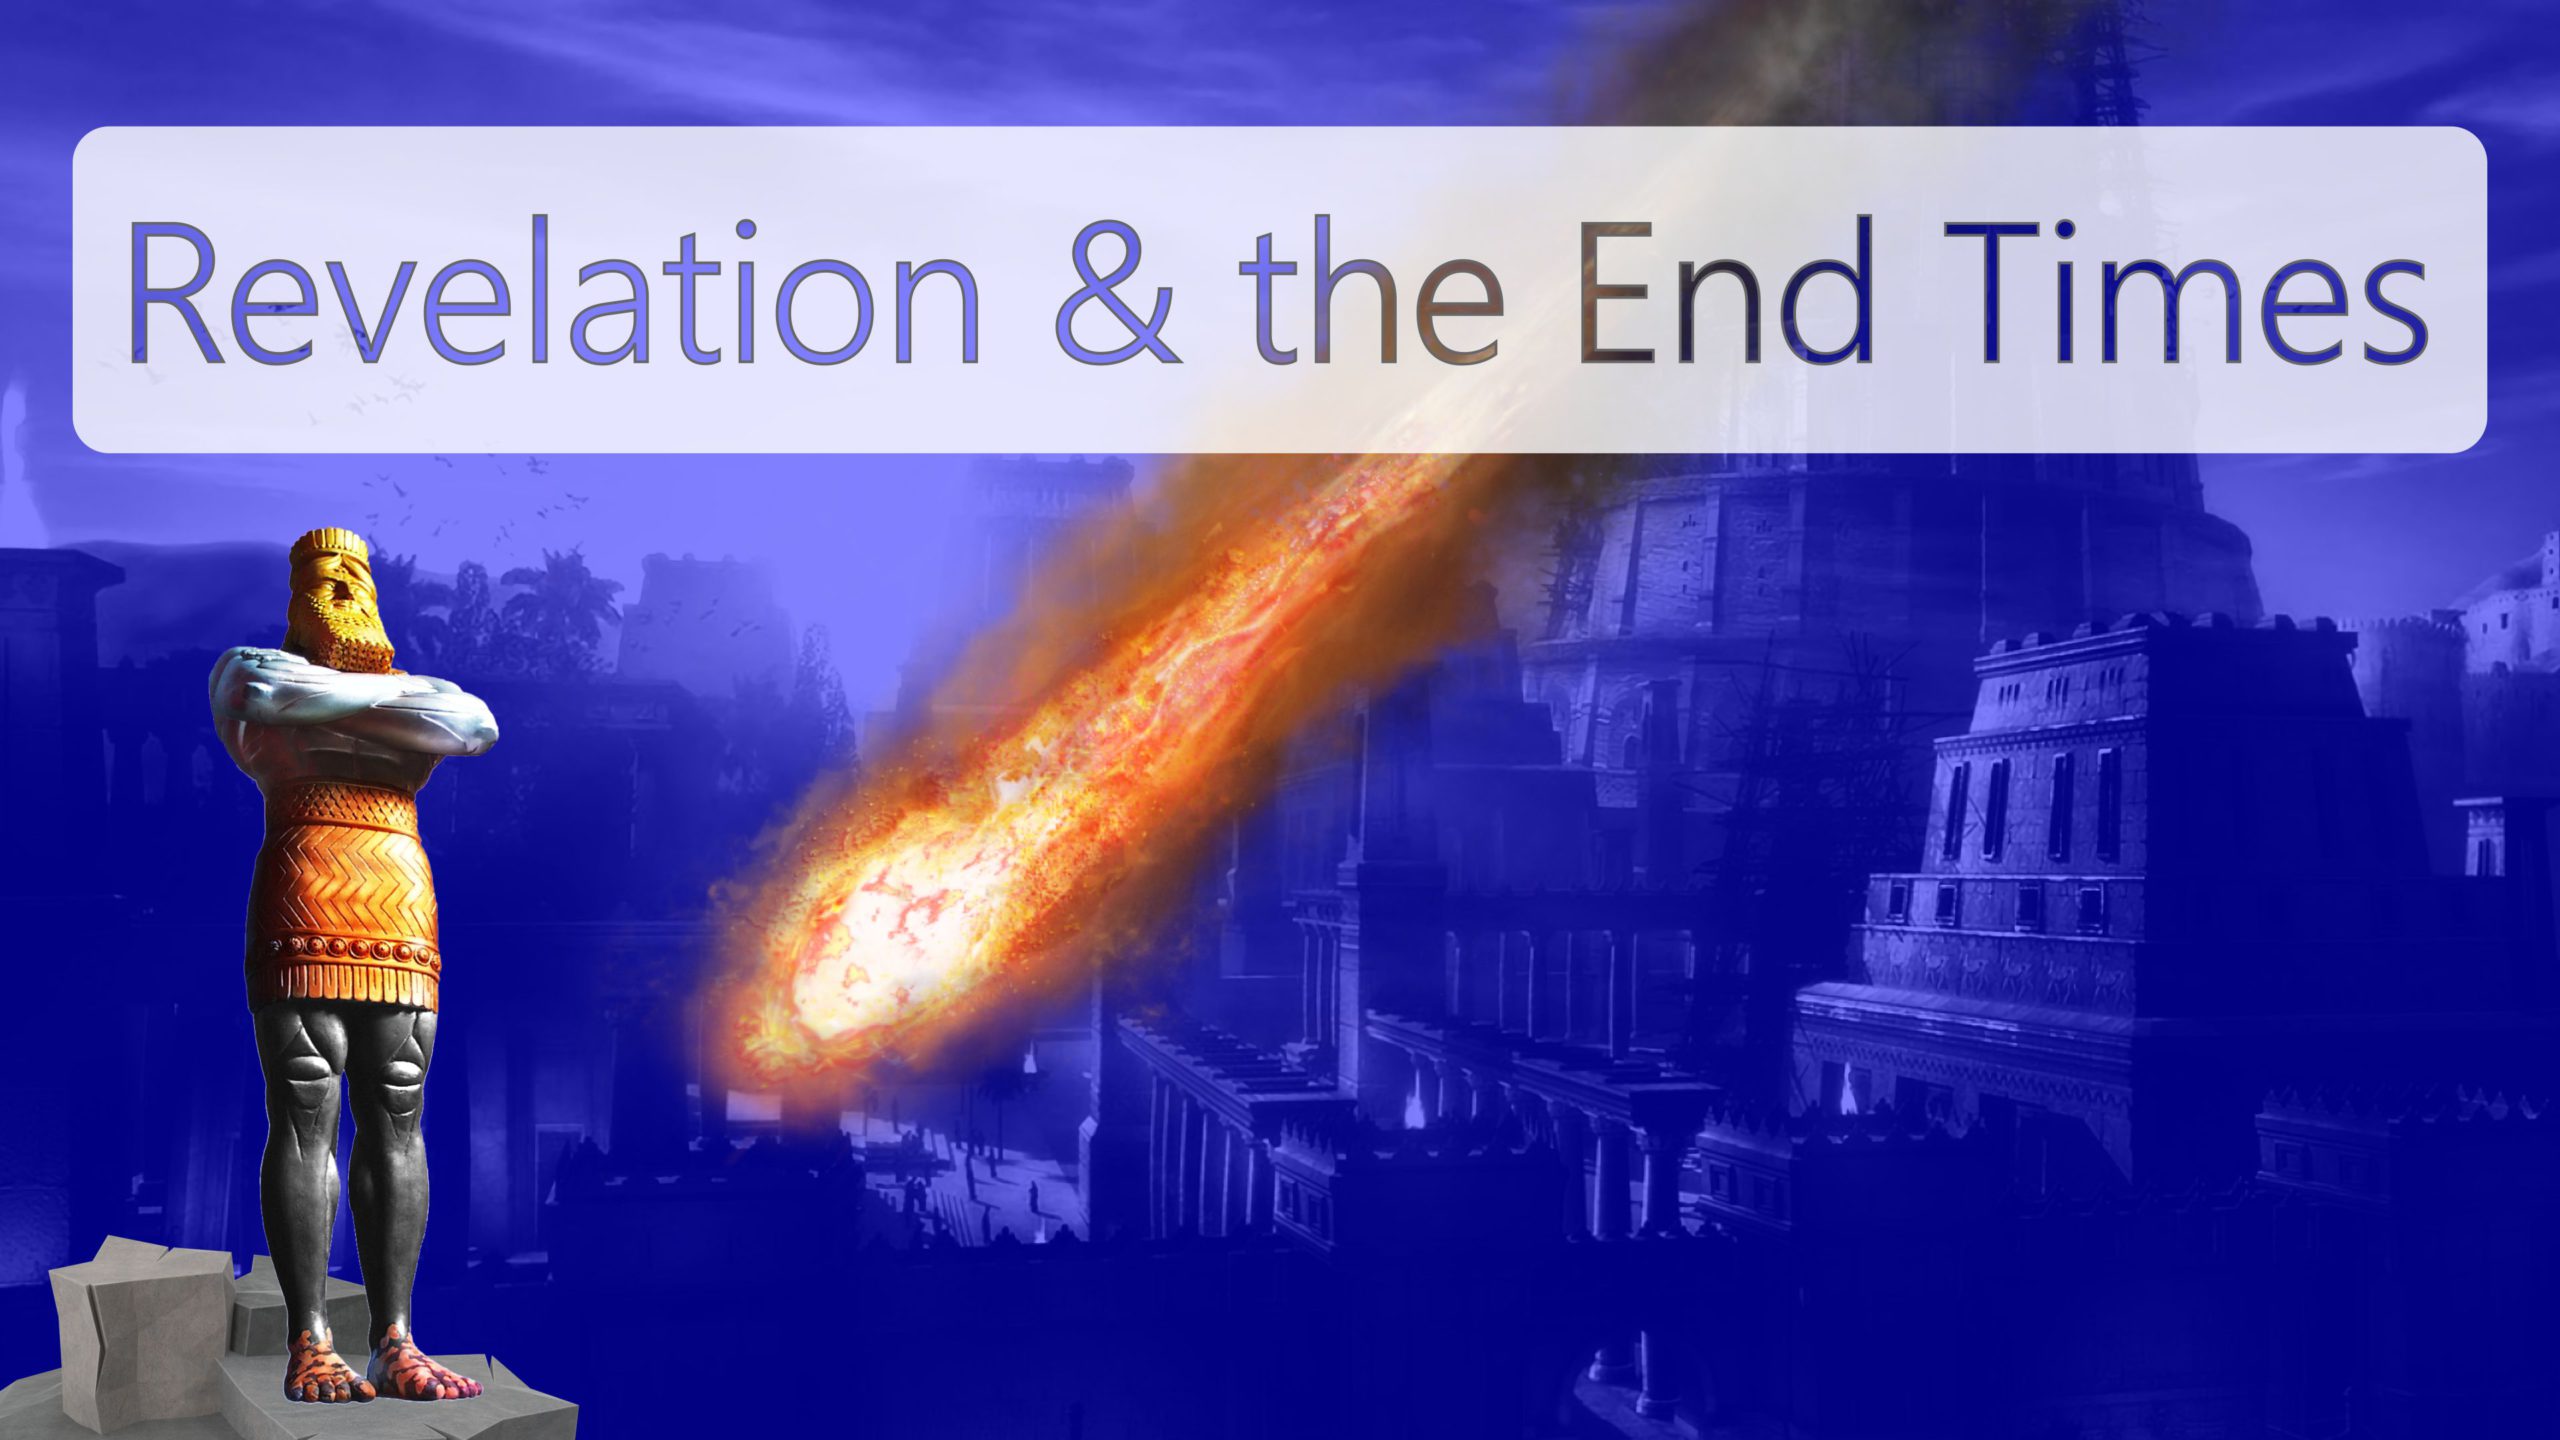 Revelation & the End Times